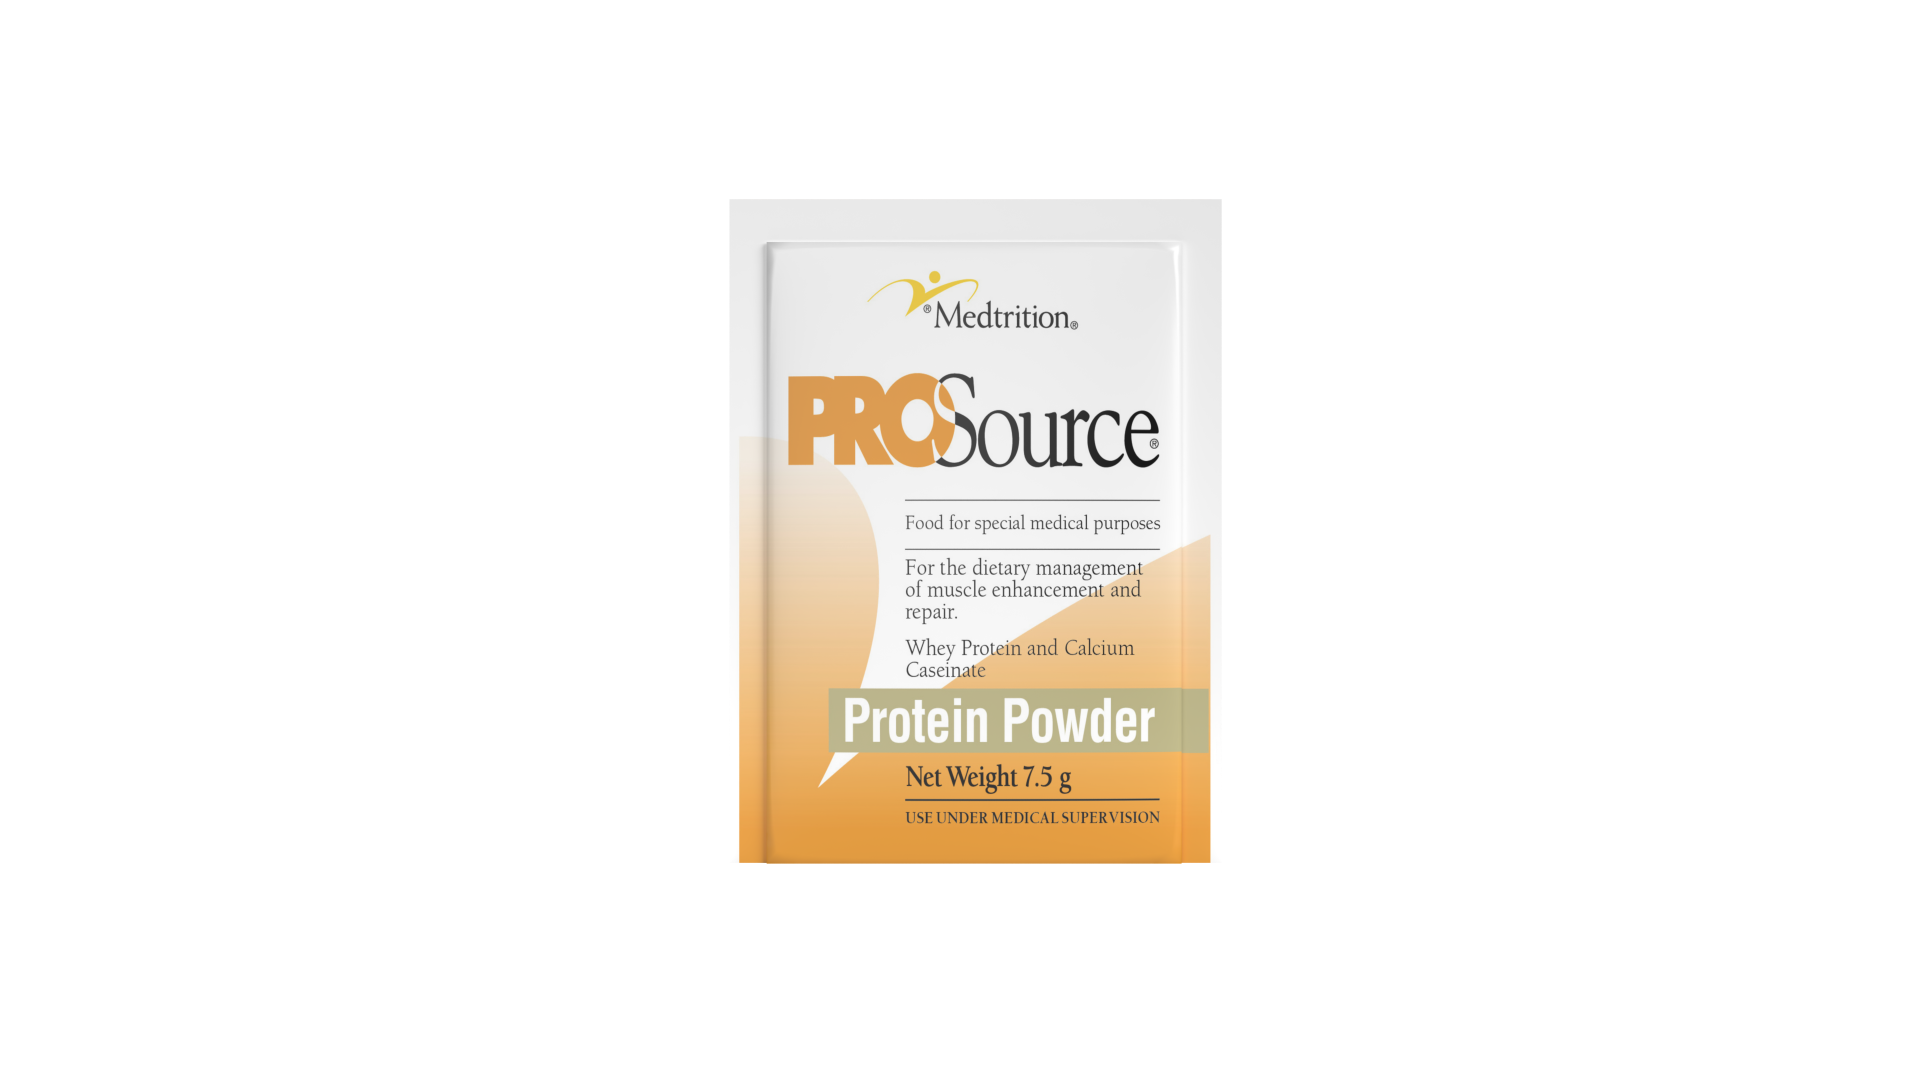 SOURCE7 Protein